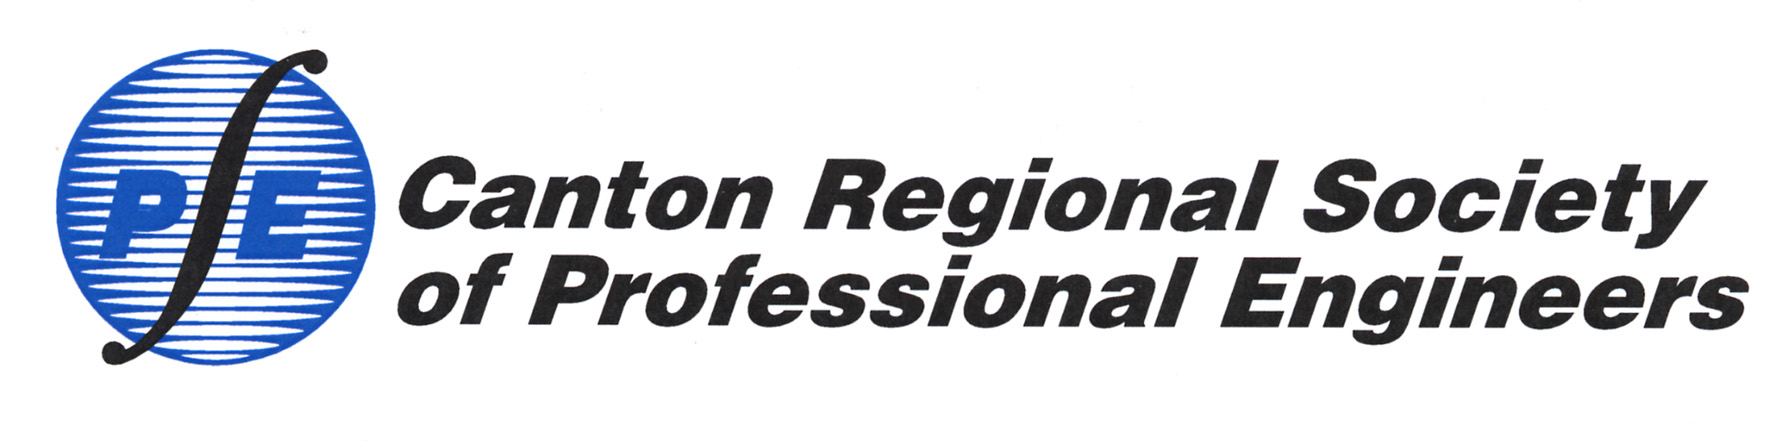 Canton Regional Society of Professional Engineers